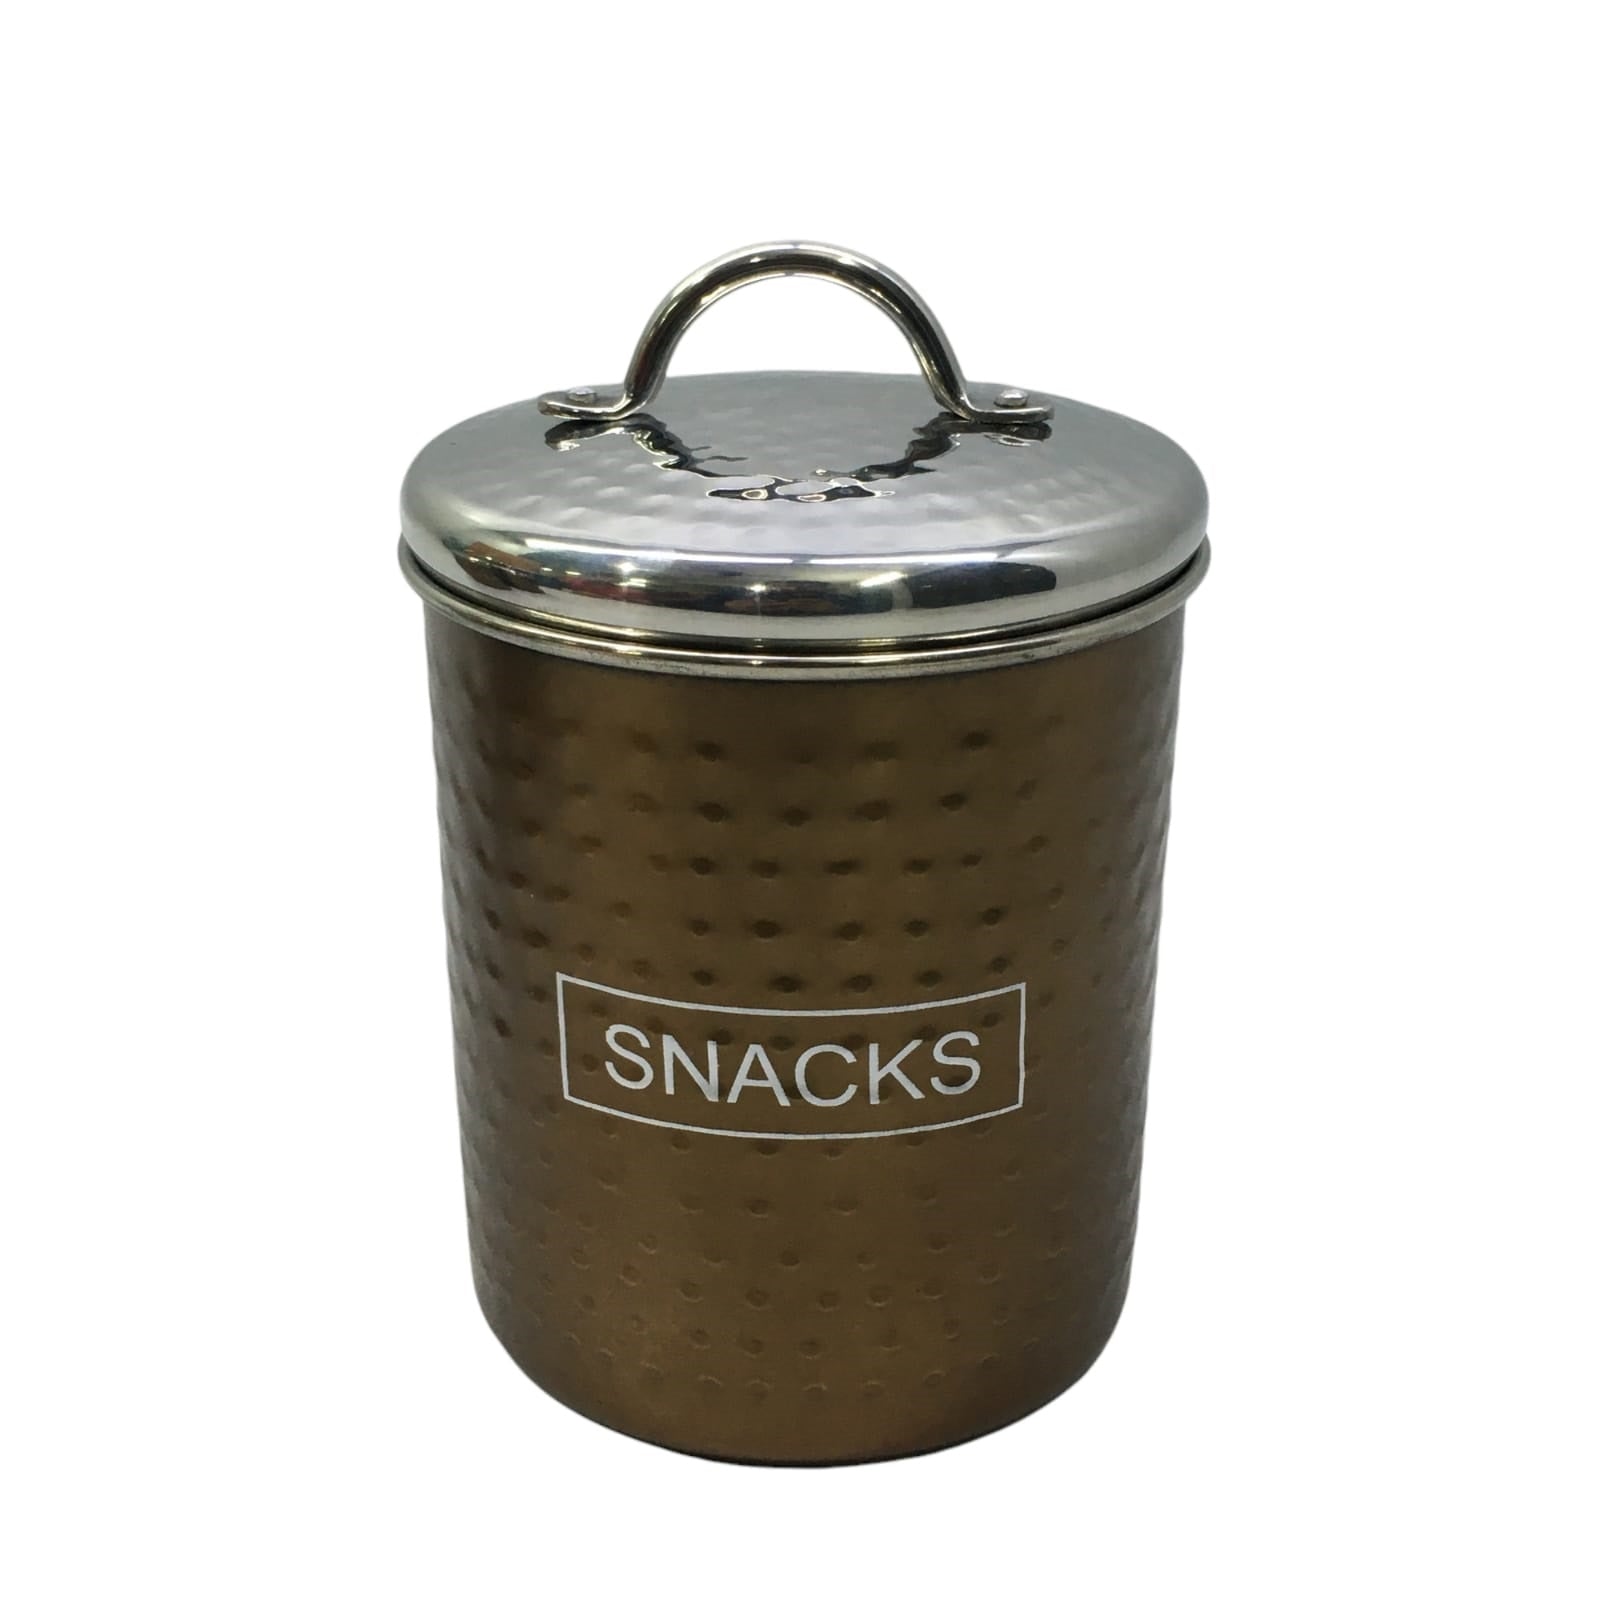 Canister Snack Tin 10x12cm Hammered Finish Stainless Steel